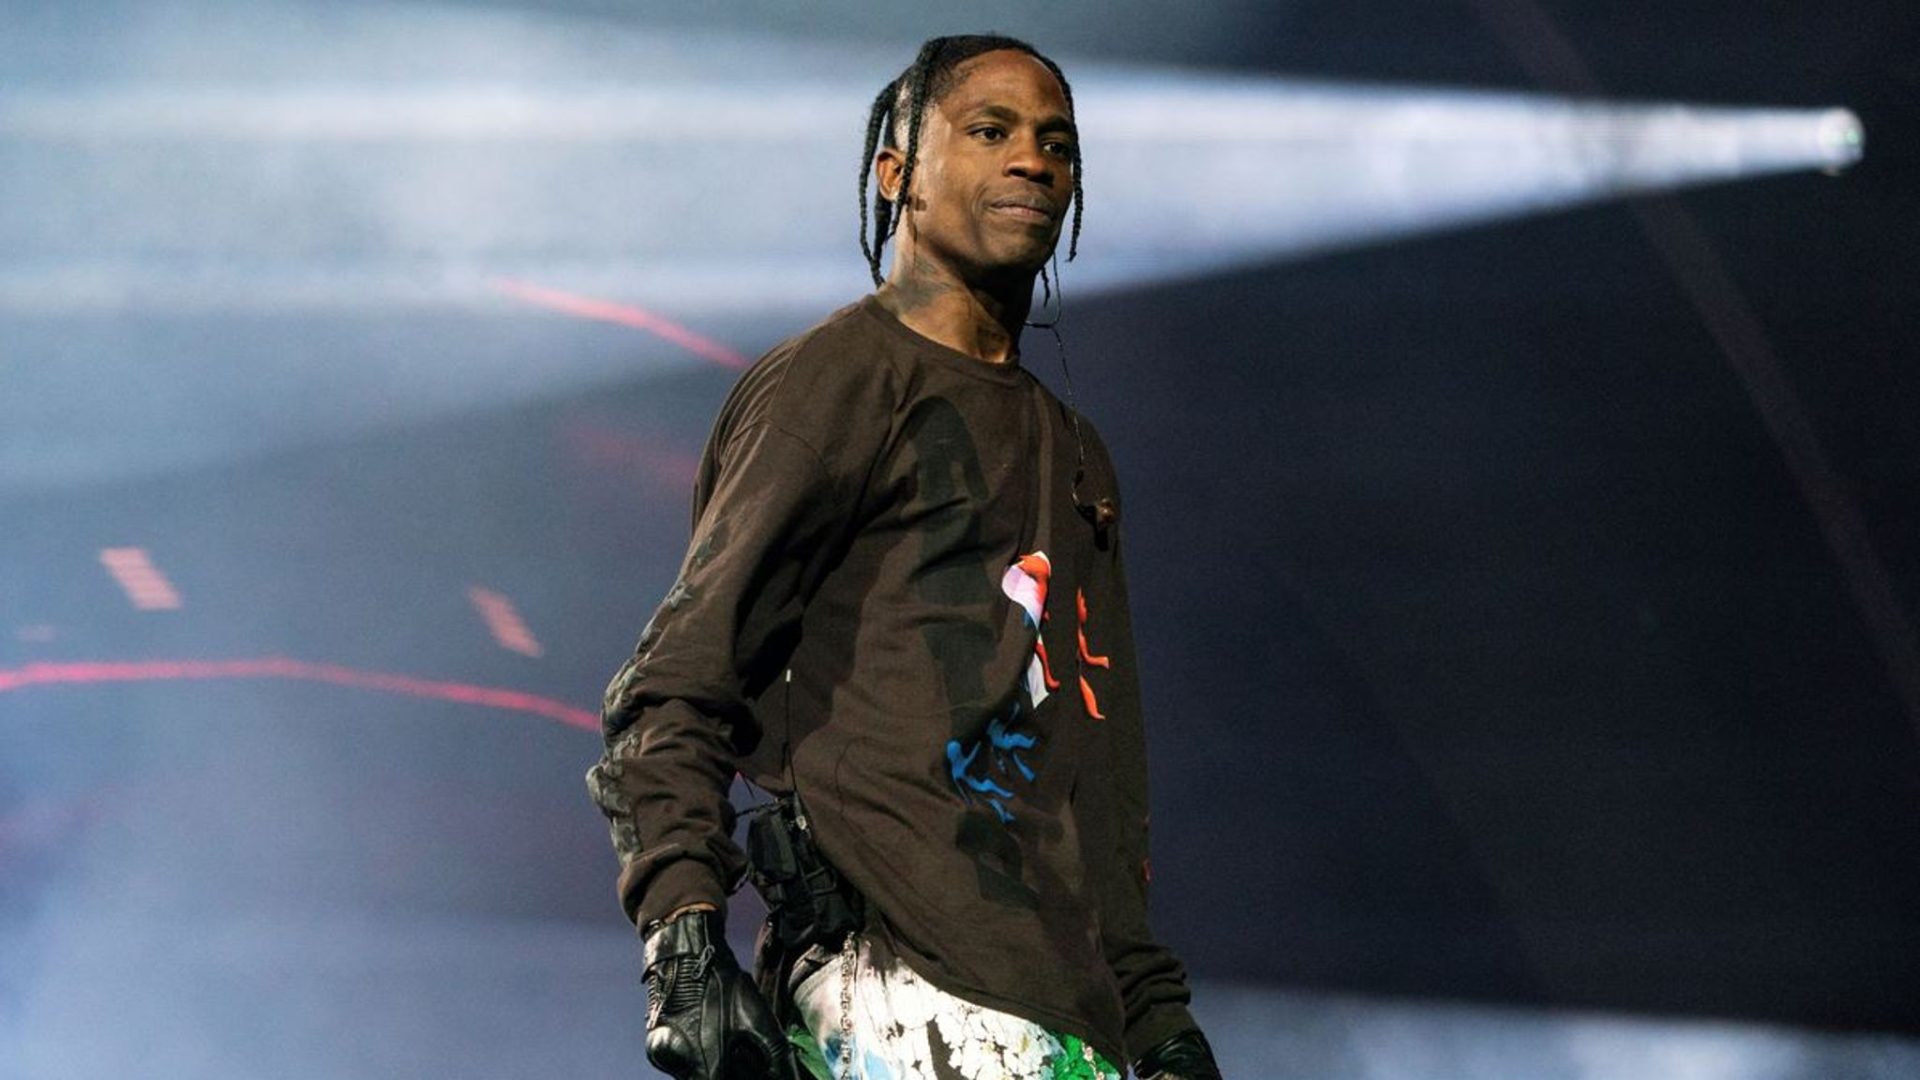 What is Going on with Travis Scott's 'Utopia' Concert in Giza